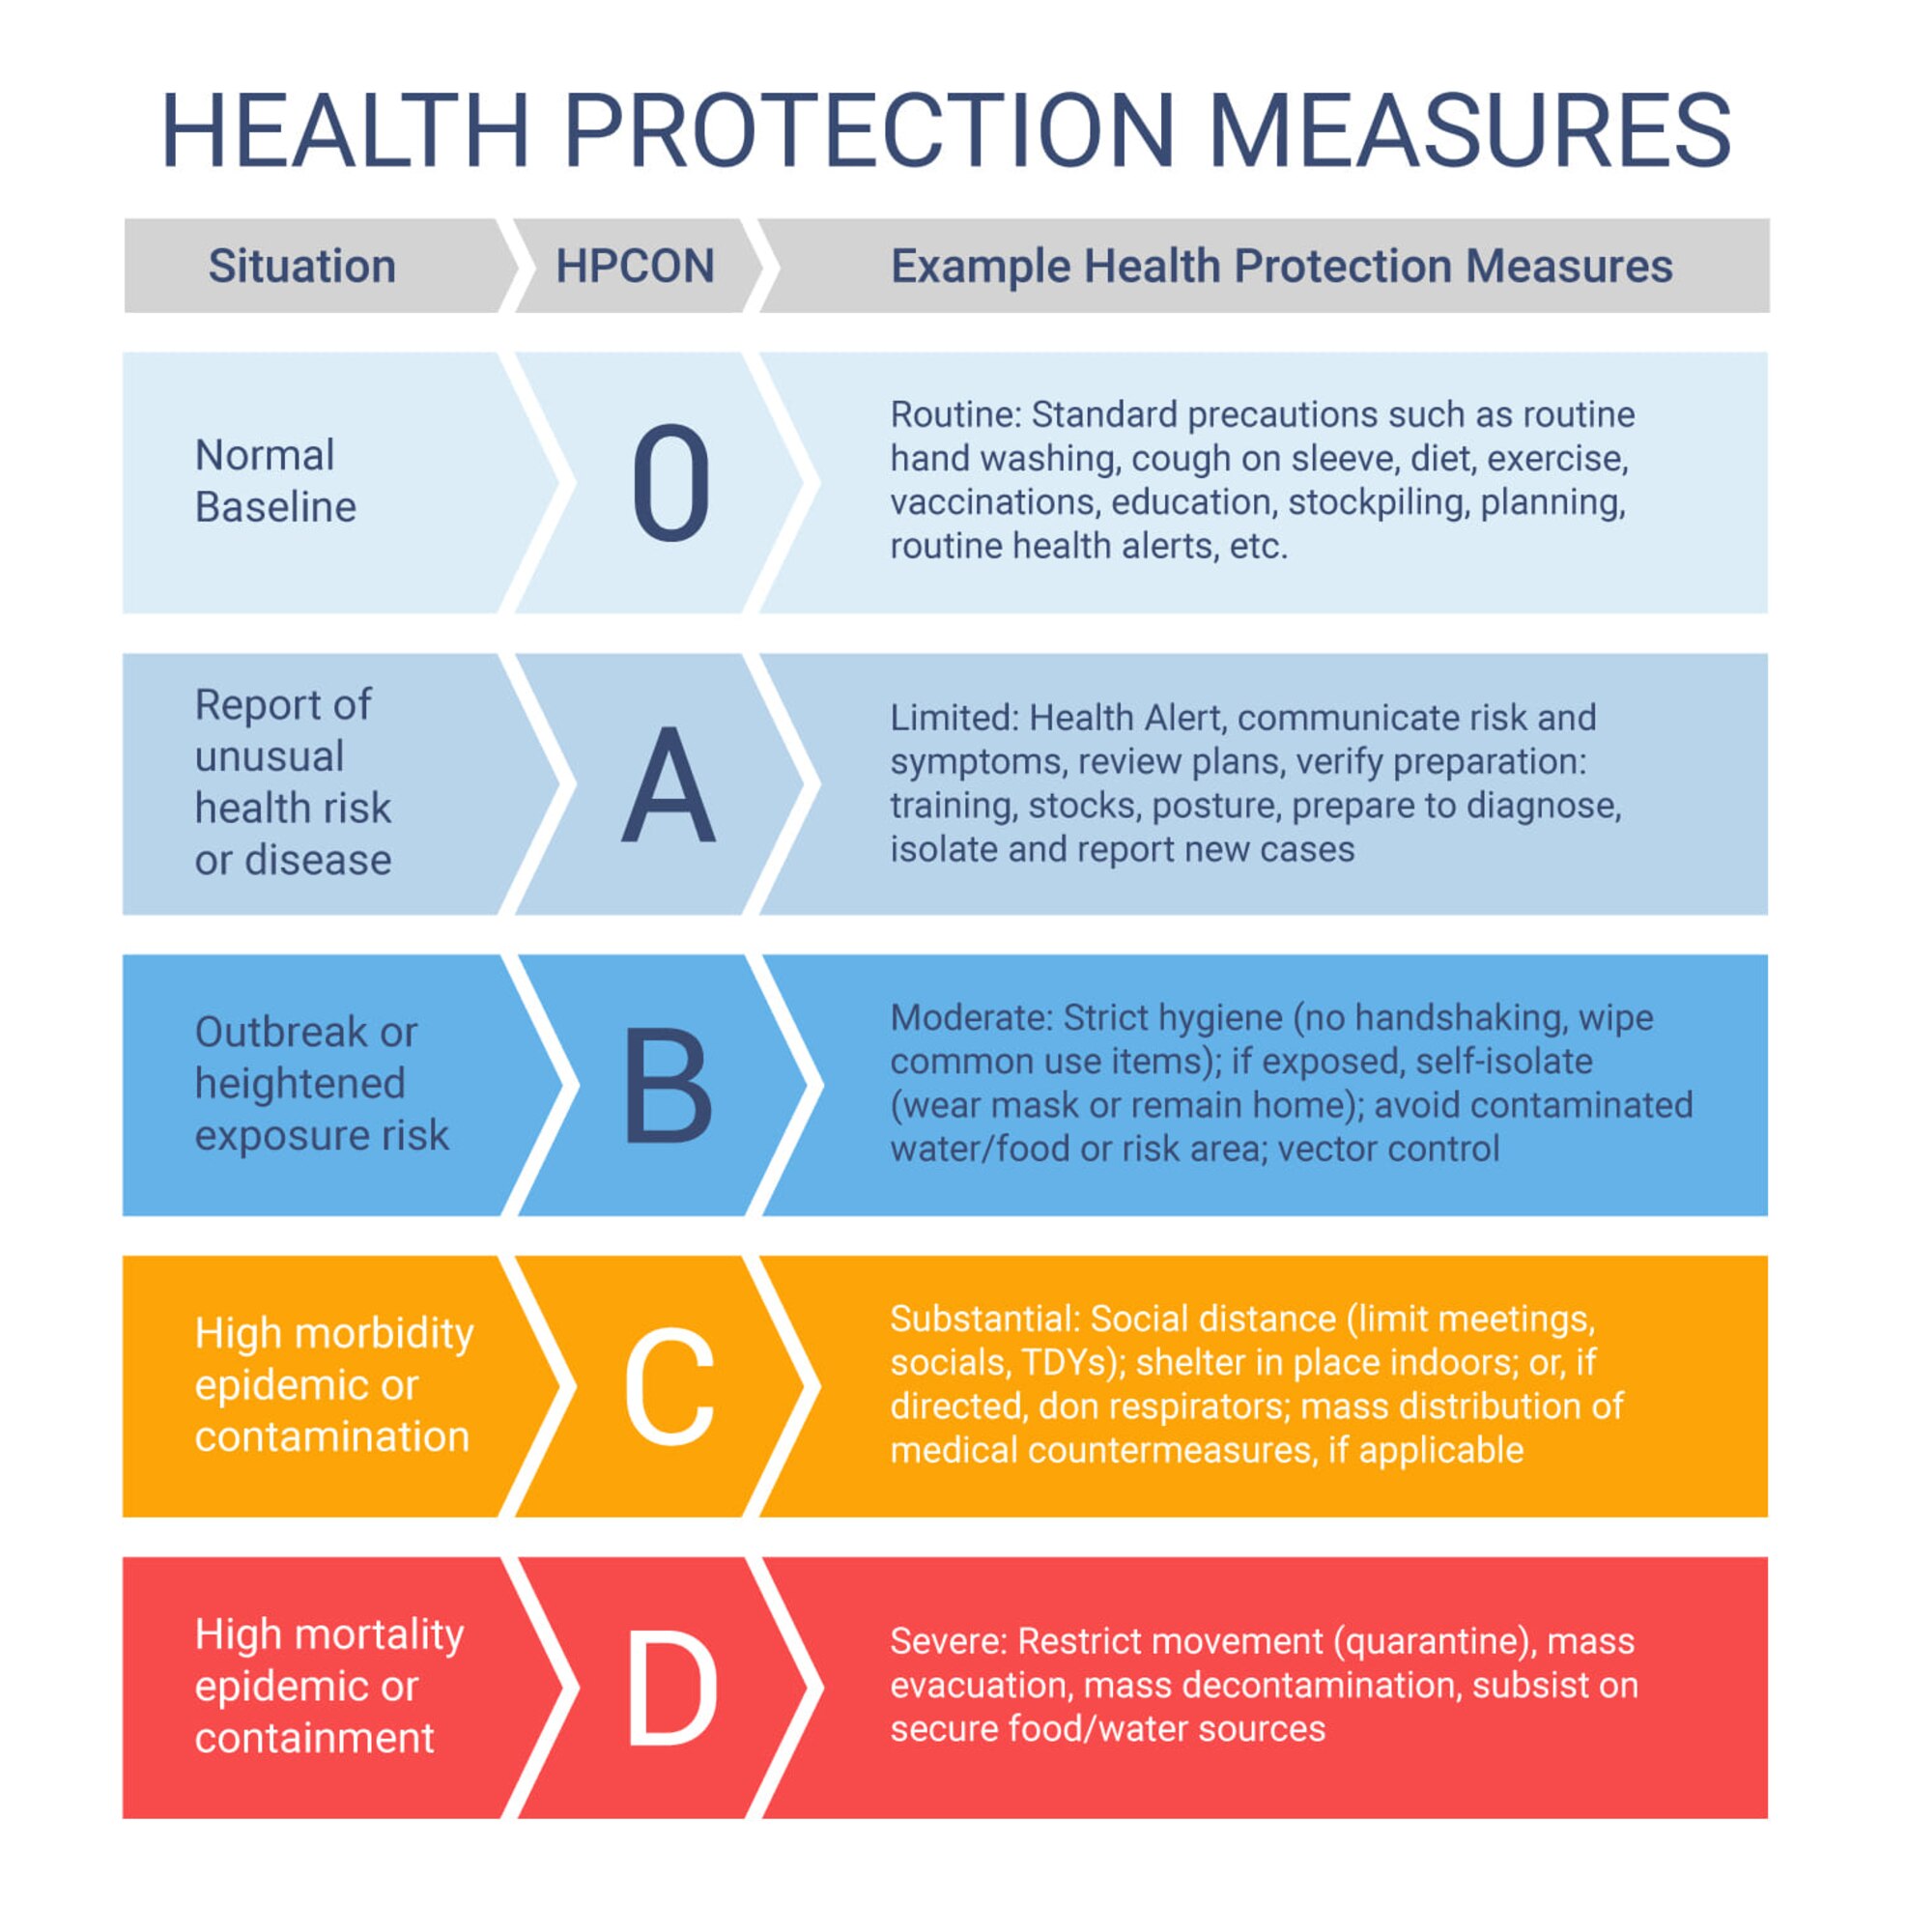 Health Protection Conditions and their corresponding health protection measures outline a comprehensive pathway for preventive protection measures for a community. (U.S. Air Force graphic)